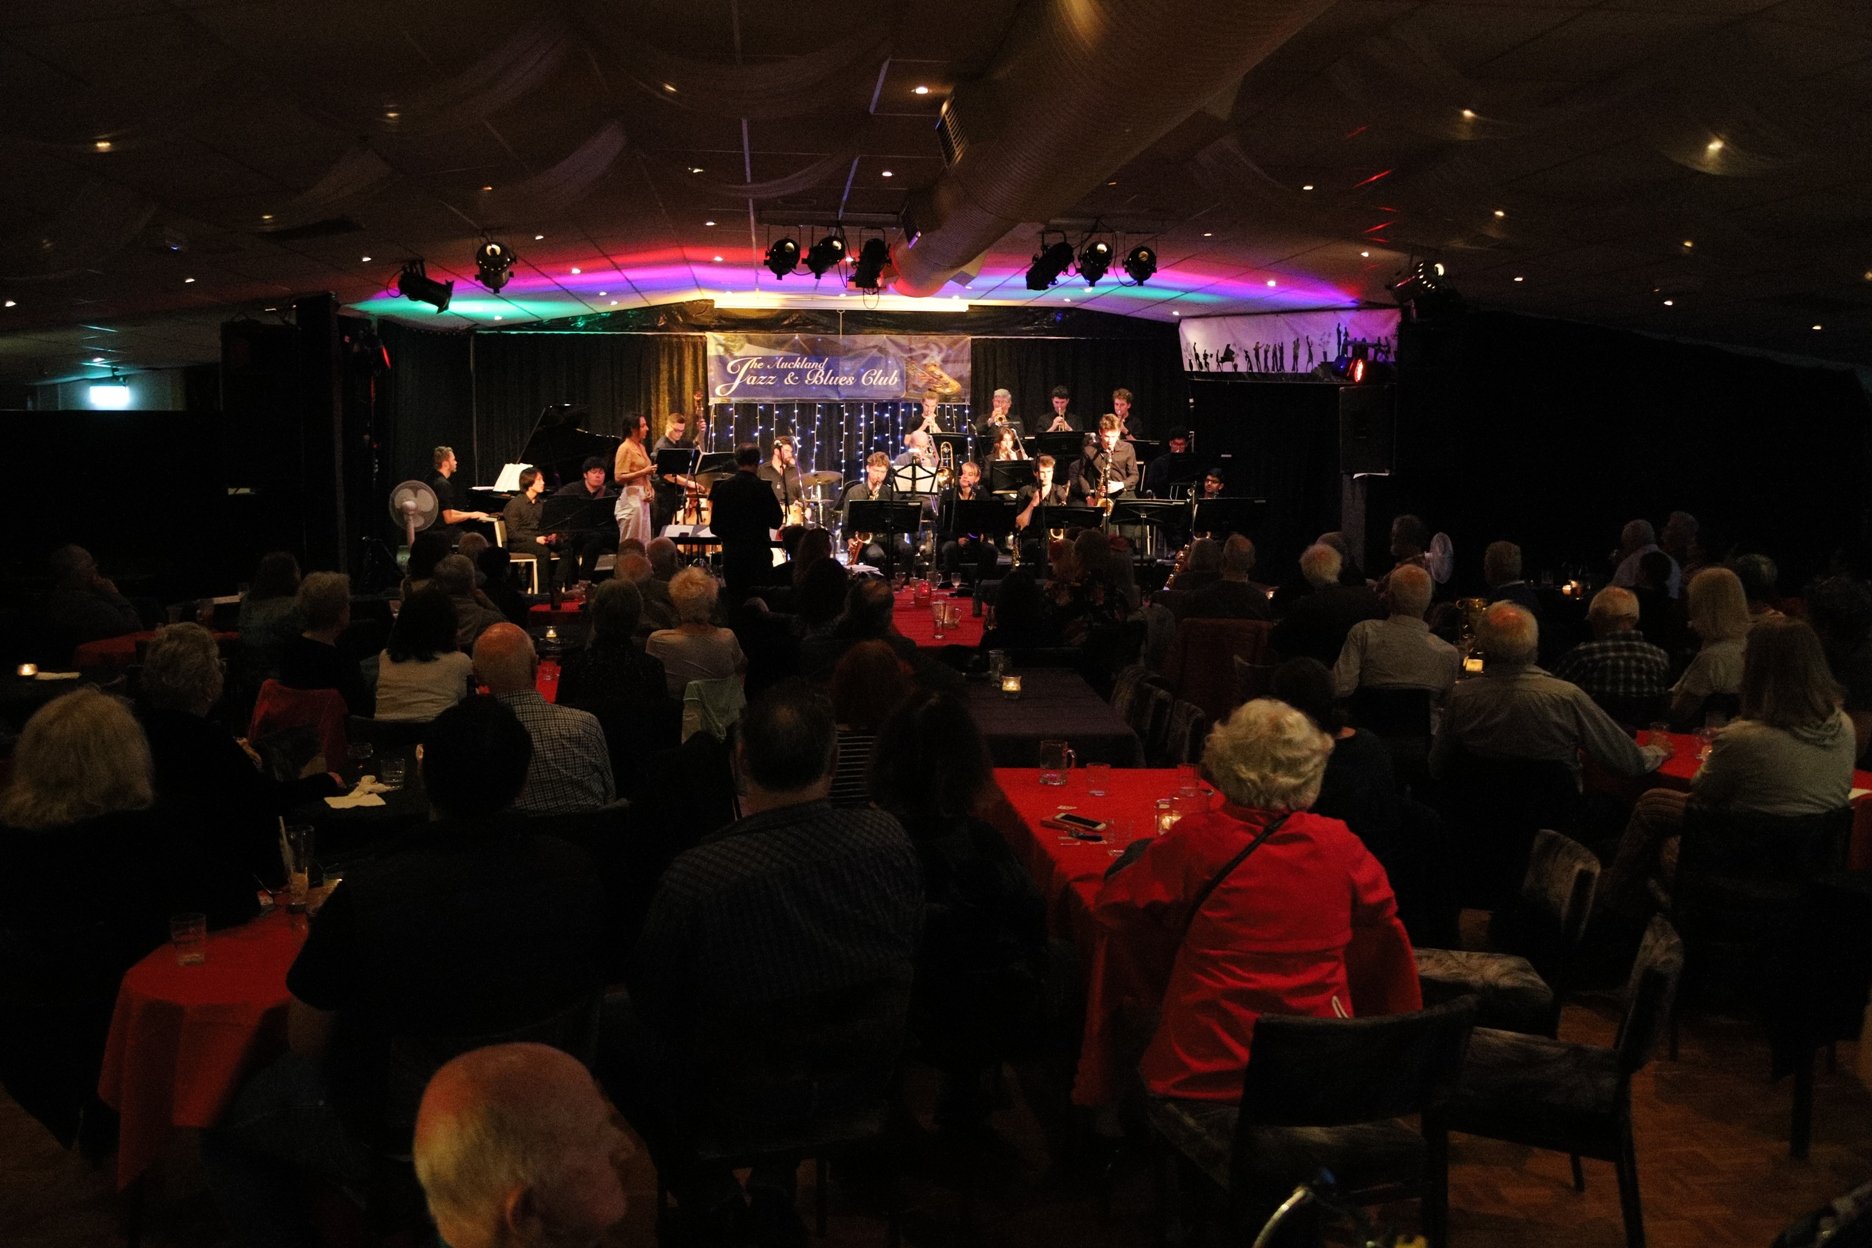 AUCKLAND UNIVERSITY BIG BANDS — Auckland Jazz and Blues Club